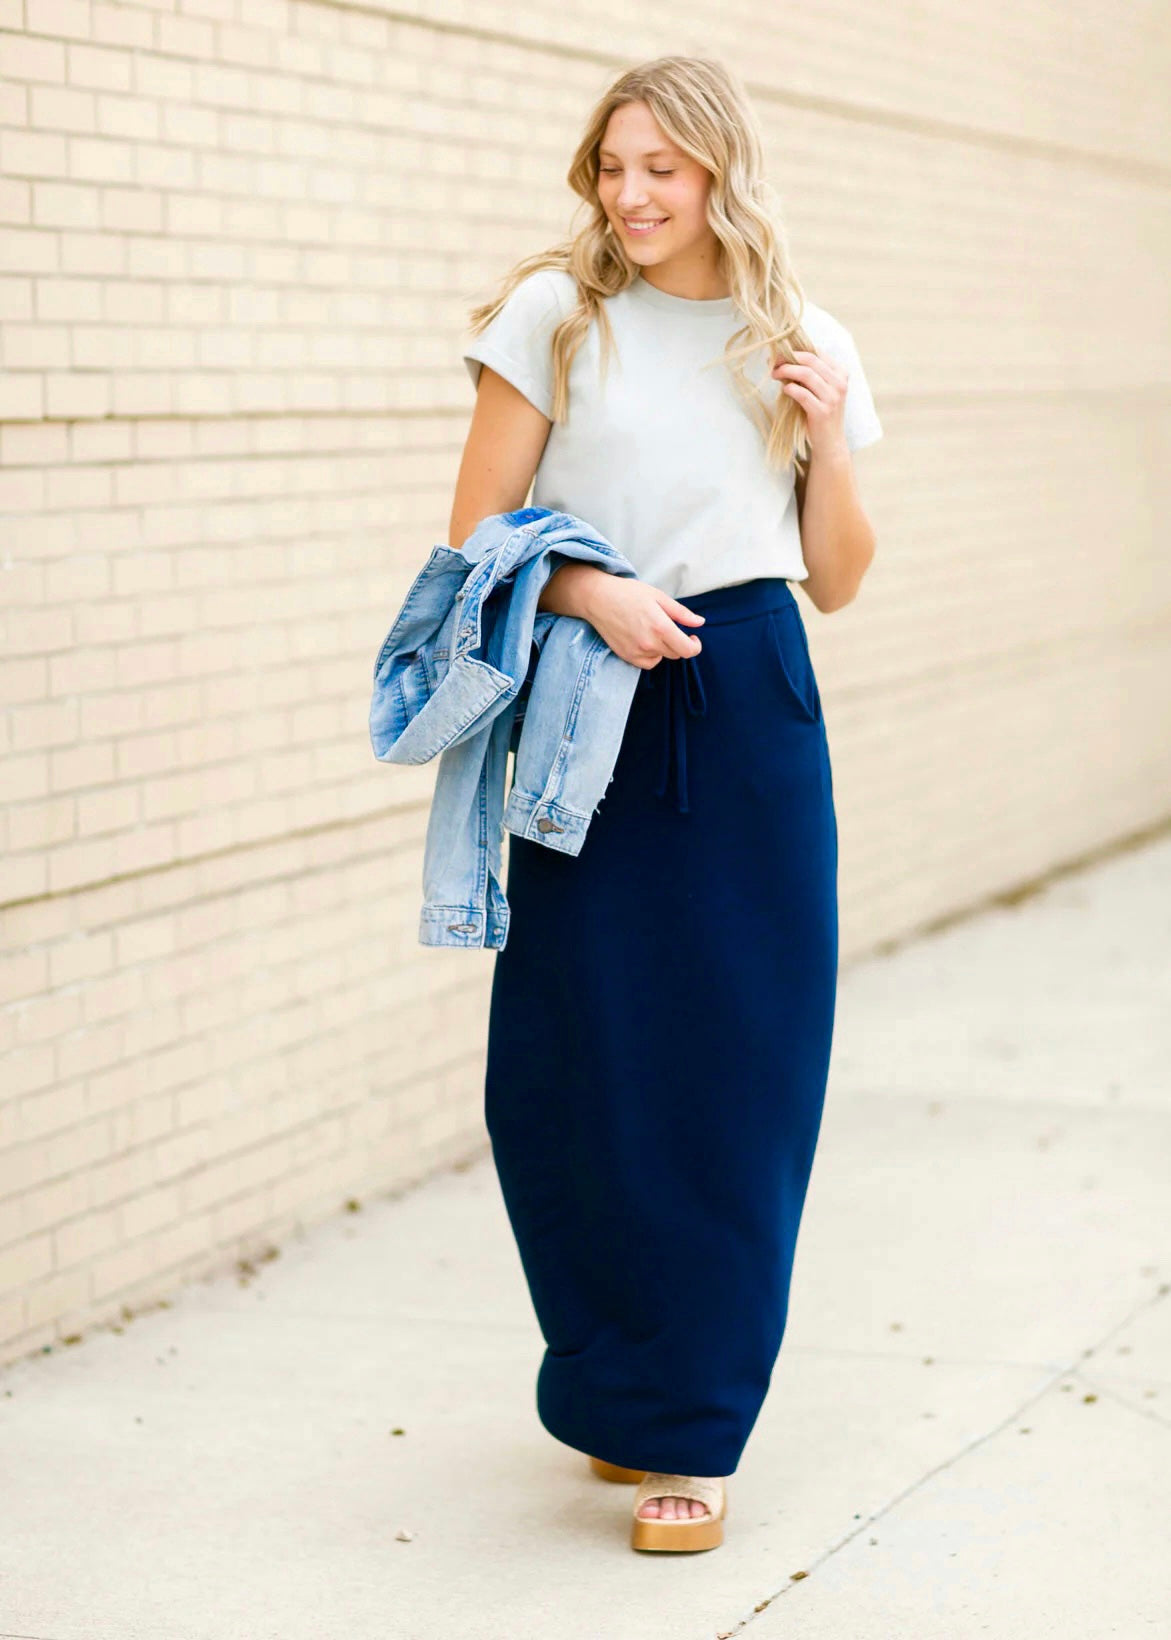 A young blonde woman holding a denim jacket in her arm while smiling and wearing a navy blue Maxi Skirt with Pockets featuring a Soft & Stretchy Premium Fabric Blend, Adjustable Drawstring Tie Waist, and Pockets. Available in sizes S-3XL in both solid Black or Navy Blue. Discover our Best Selling All-year All-season Maxi Skirt for every body shape & size. 